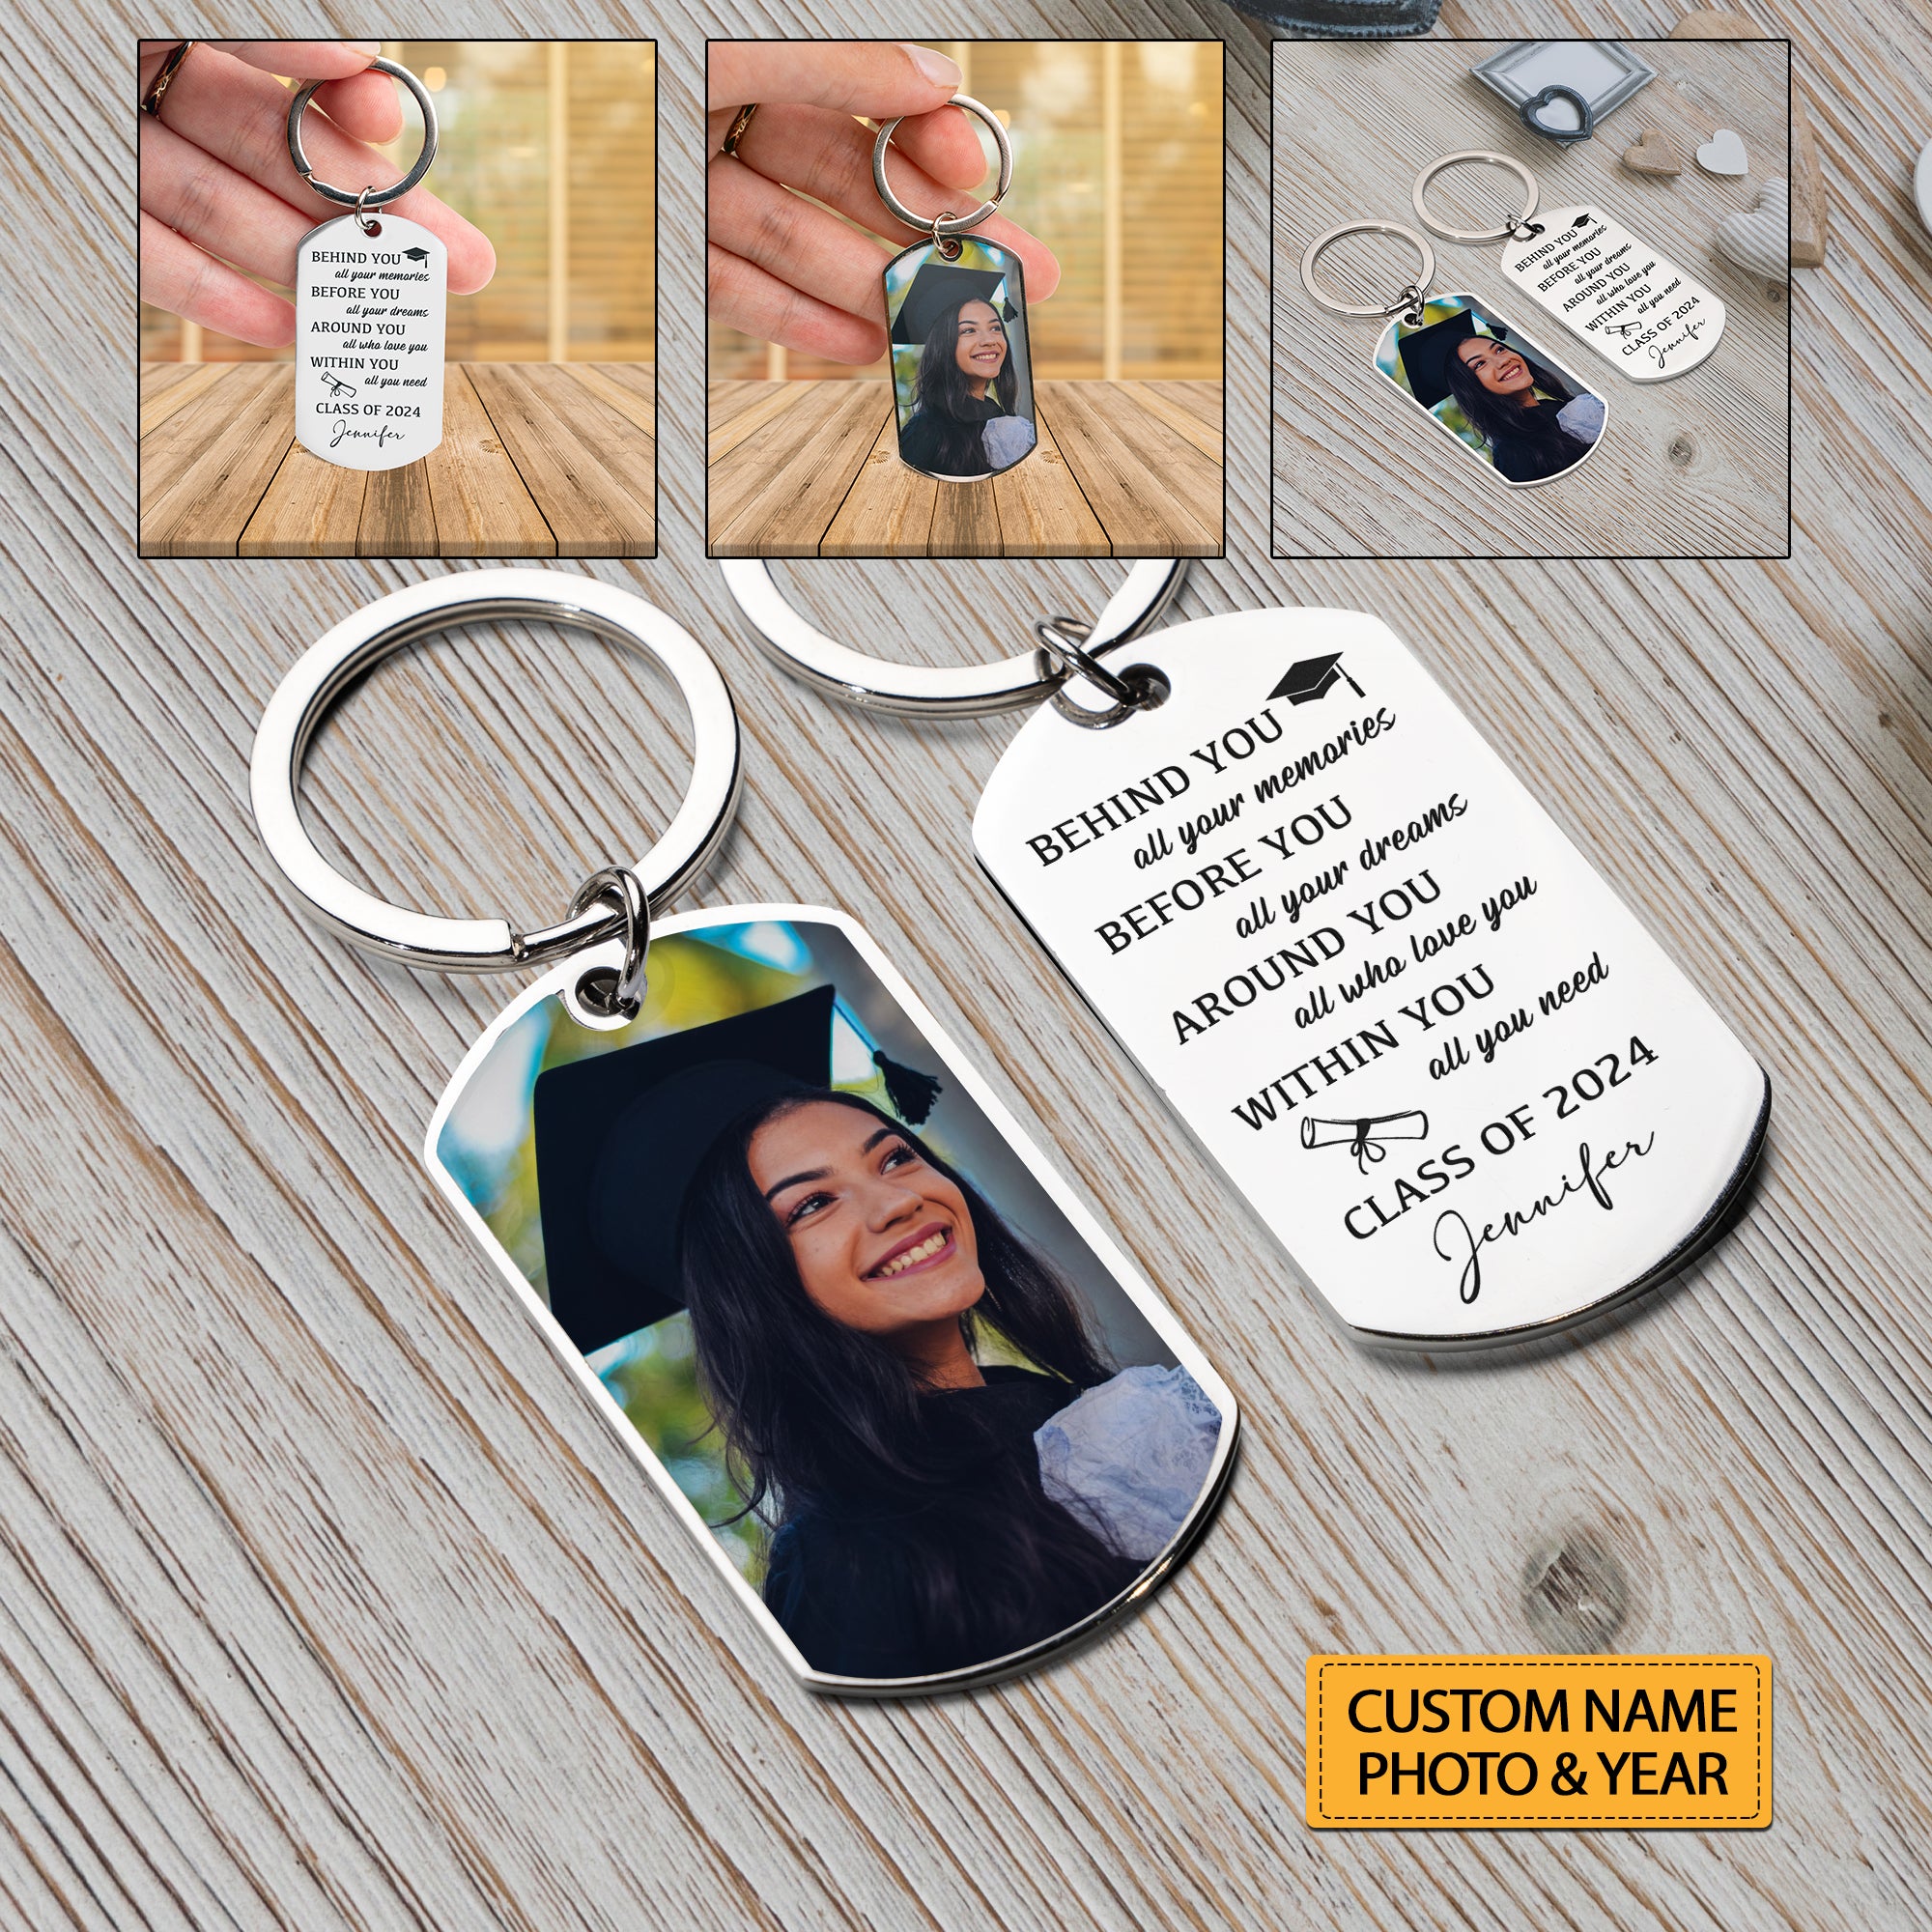 Behind You All Your Memories , Personalized Photo And Text Metal Keychain, Graduation Gift